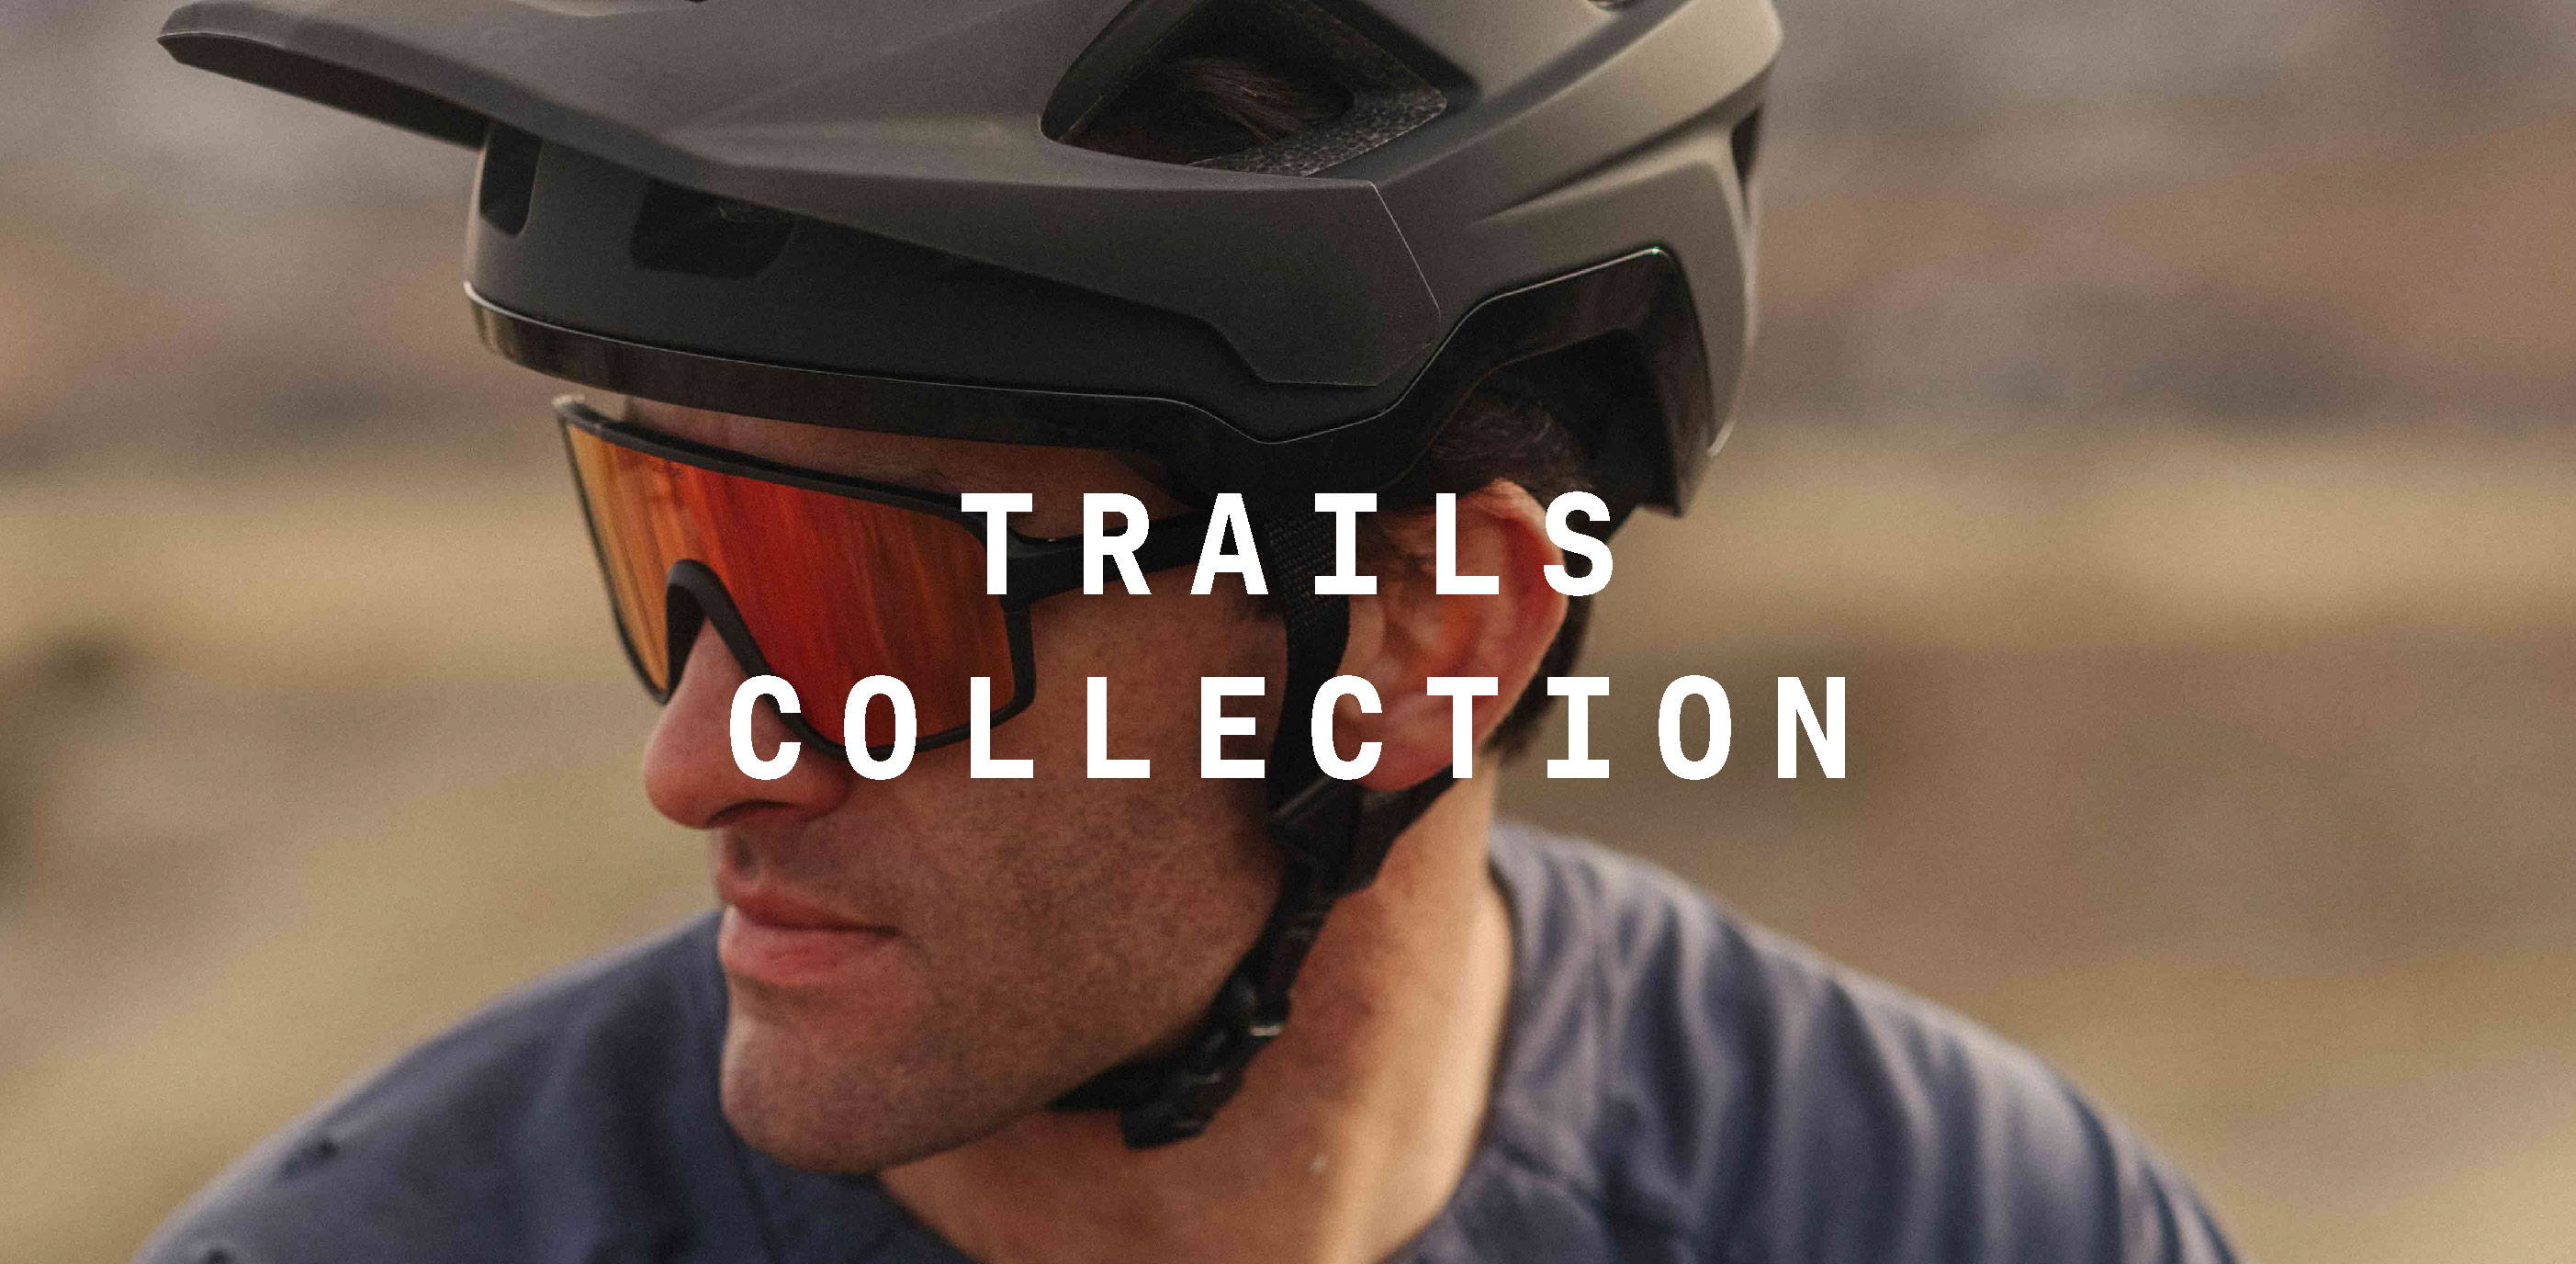 Trails Collection